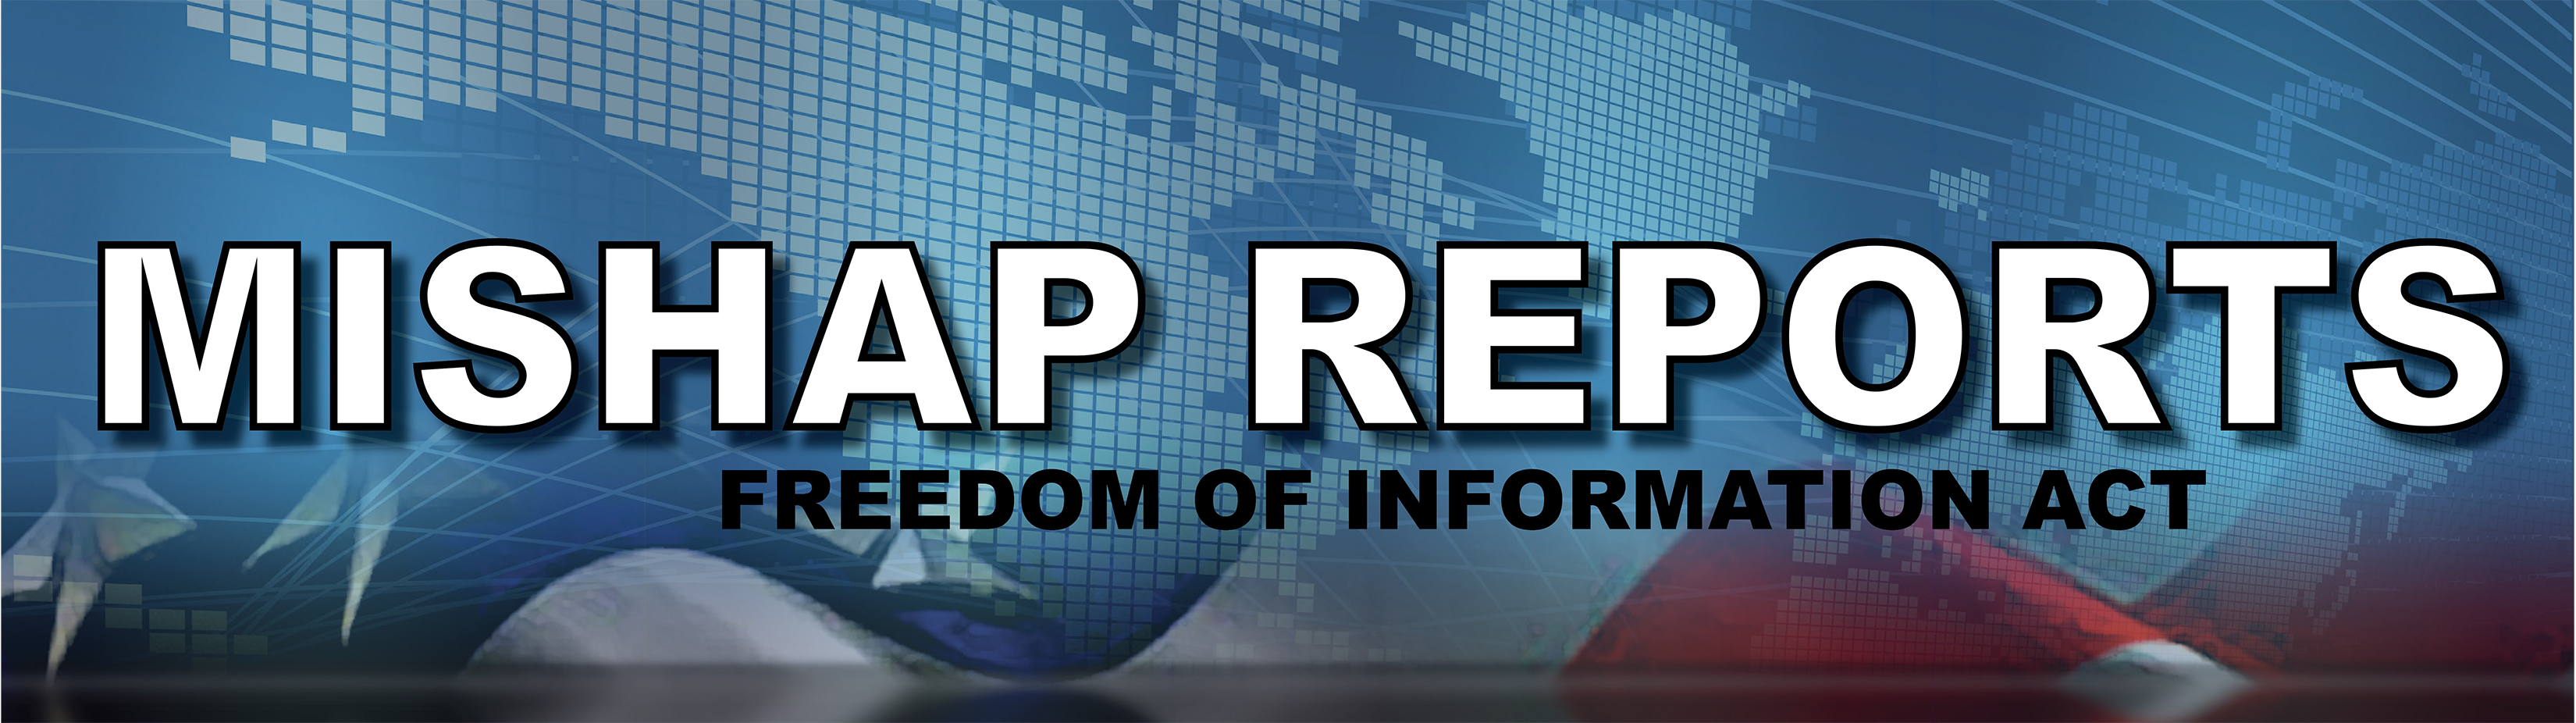 Mishap Reports Freedom of Information Act Link